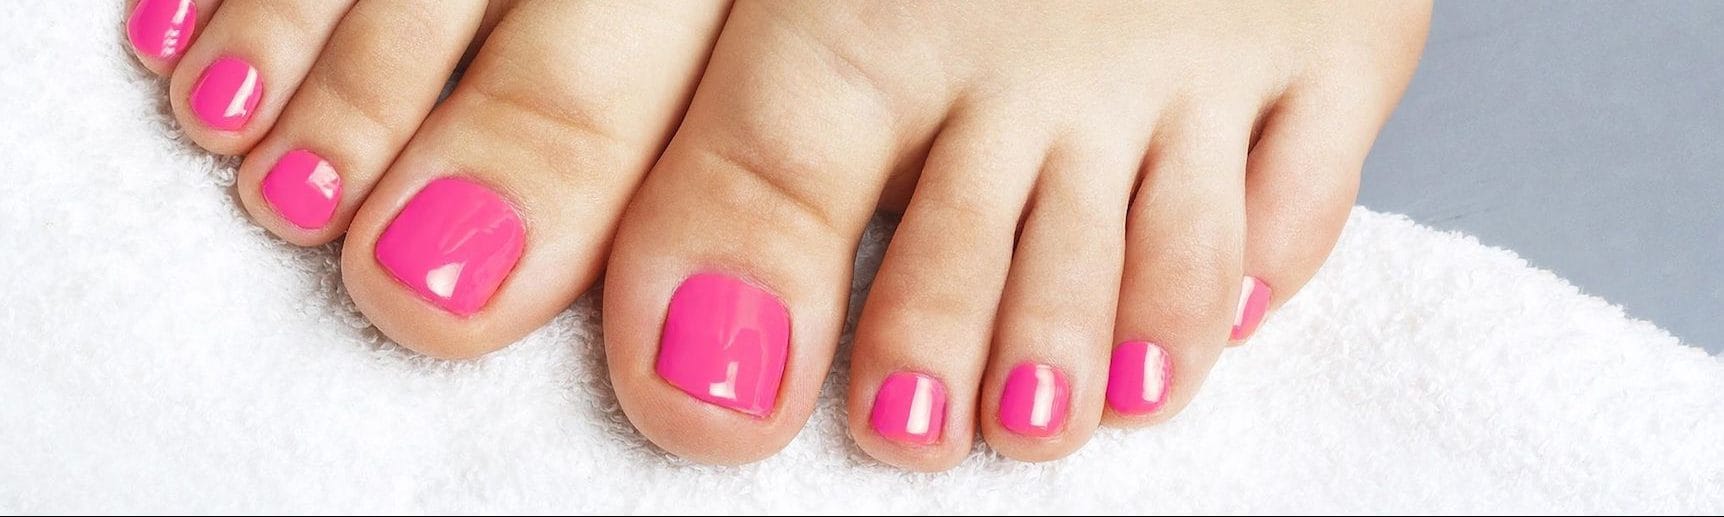 toe shellac nails by a mobile nail technician in reigate surrey